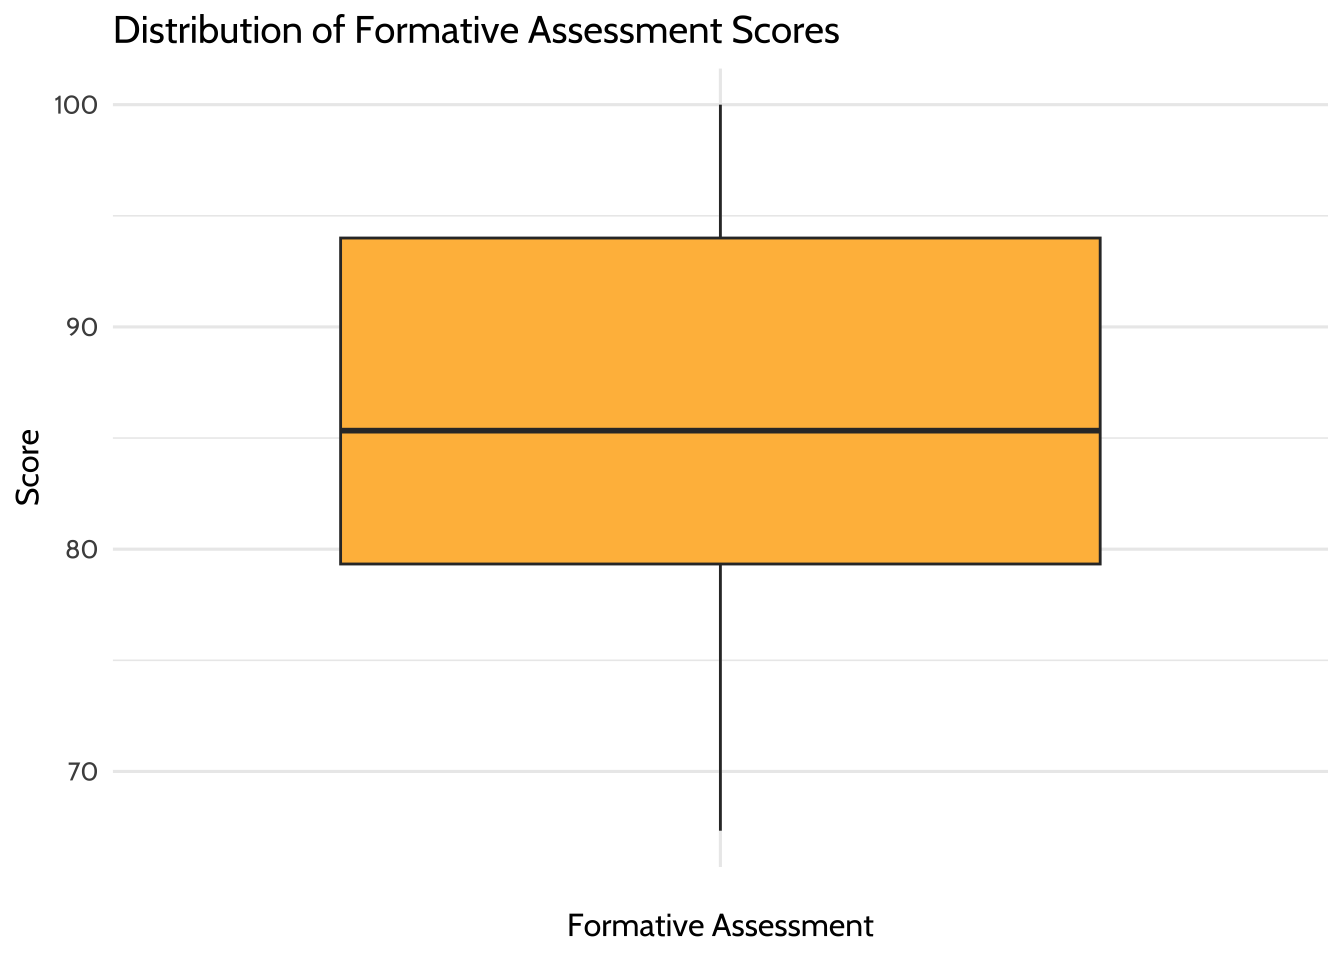 Distribution of Formative Assessment Scores